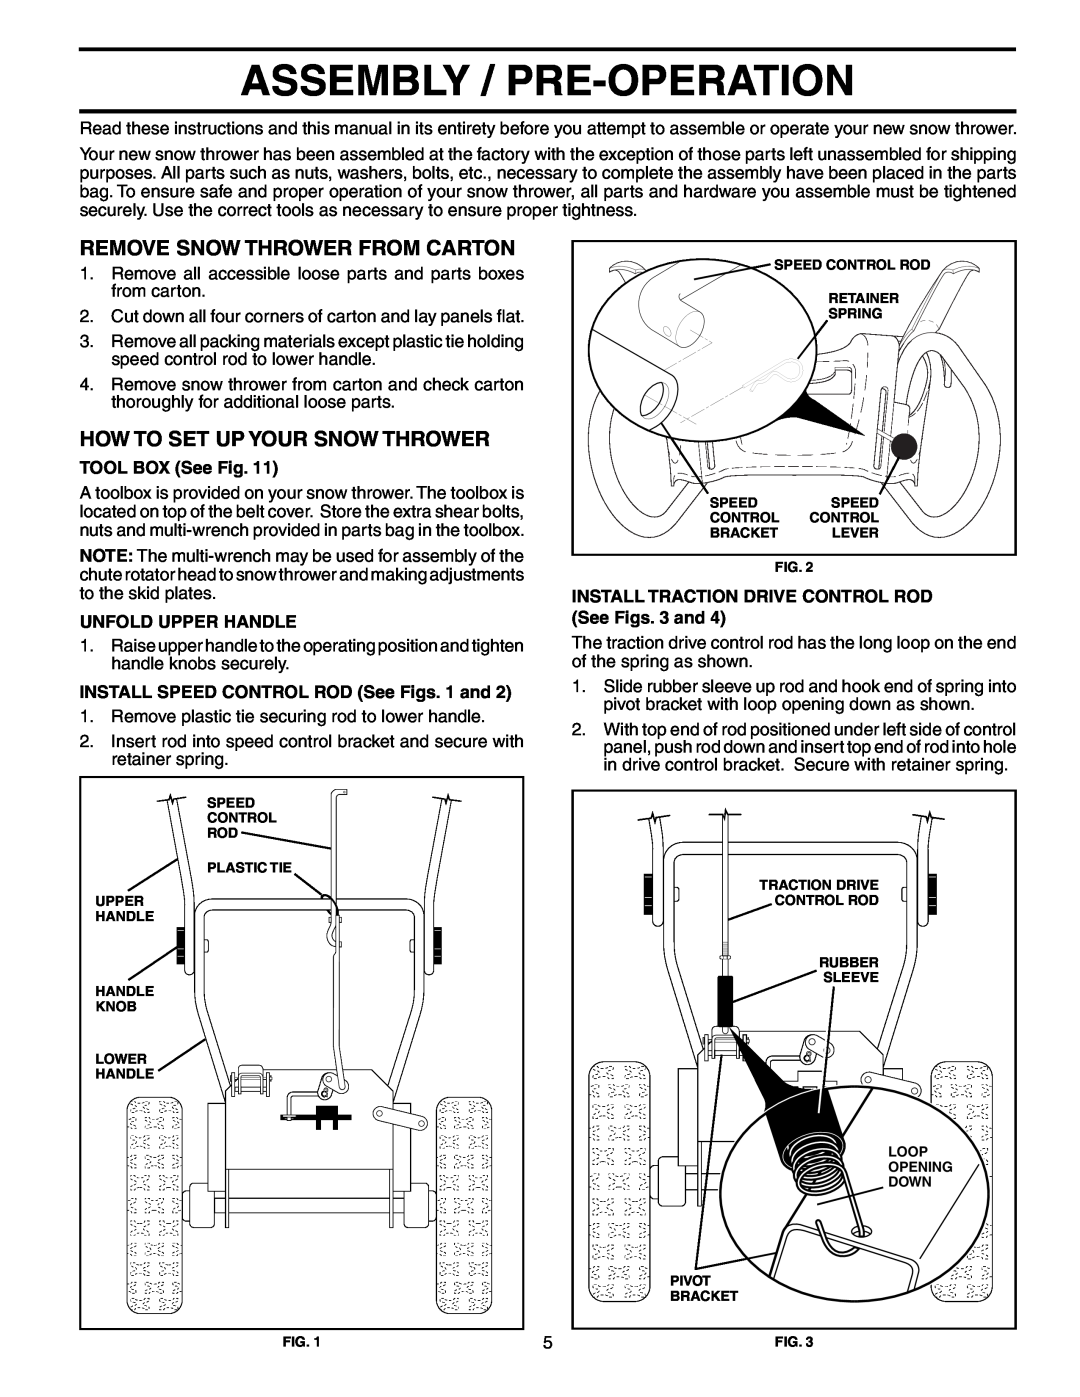 Poulan PP1130ESC owner manual Assembly / Pre-Operation, Remove Snow Thrower From Carton, How To Set Up Your Snow Thrower 